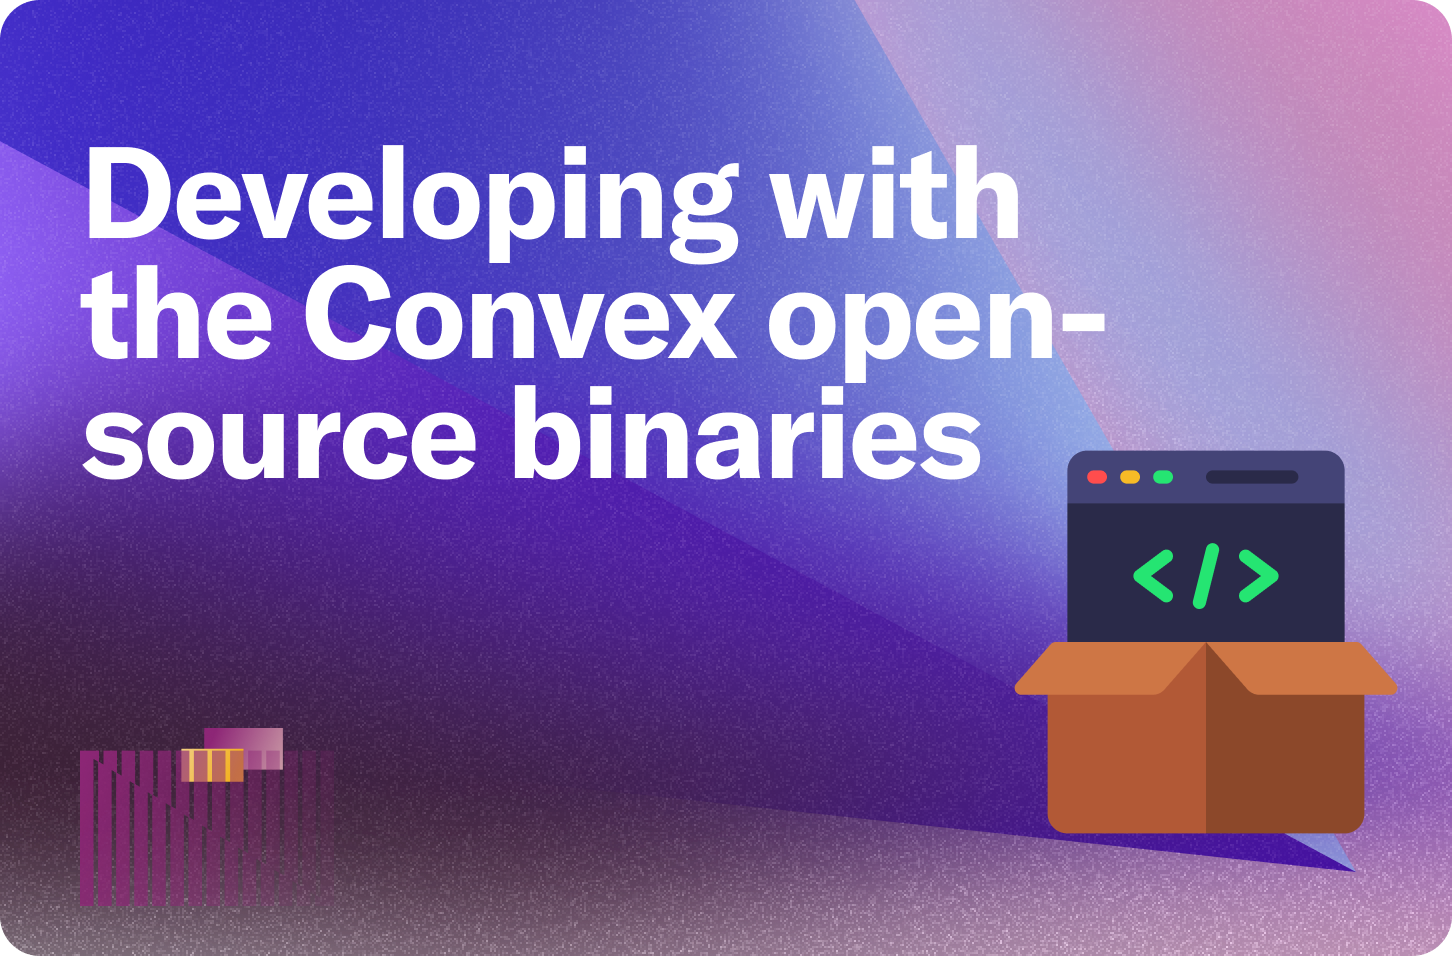 Developing with the convex open-source binaries